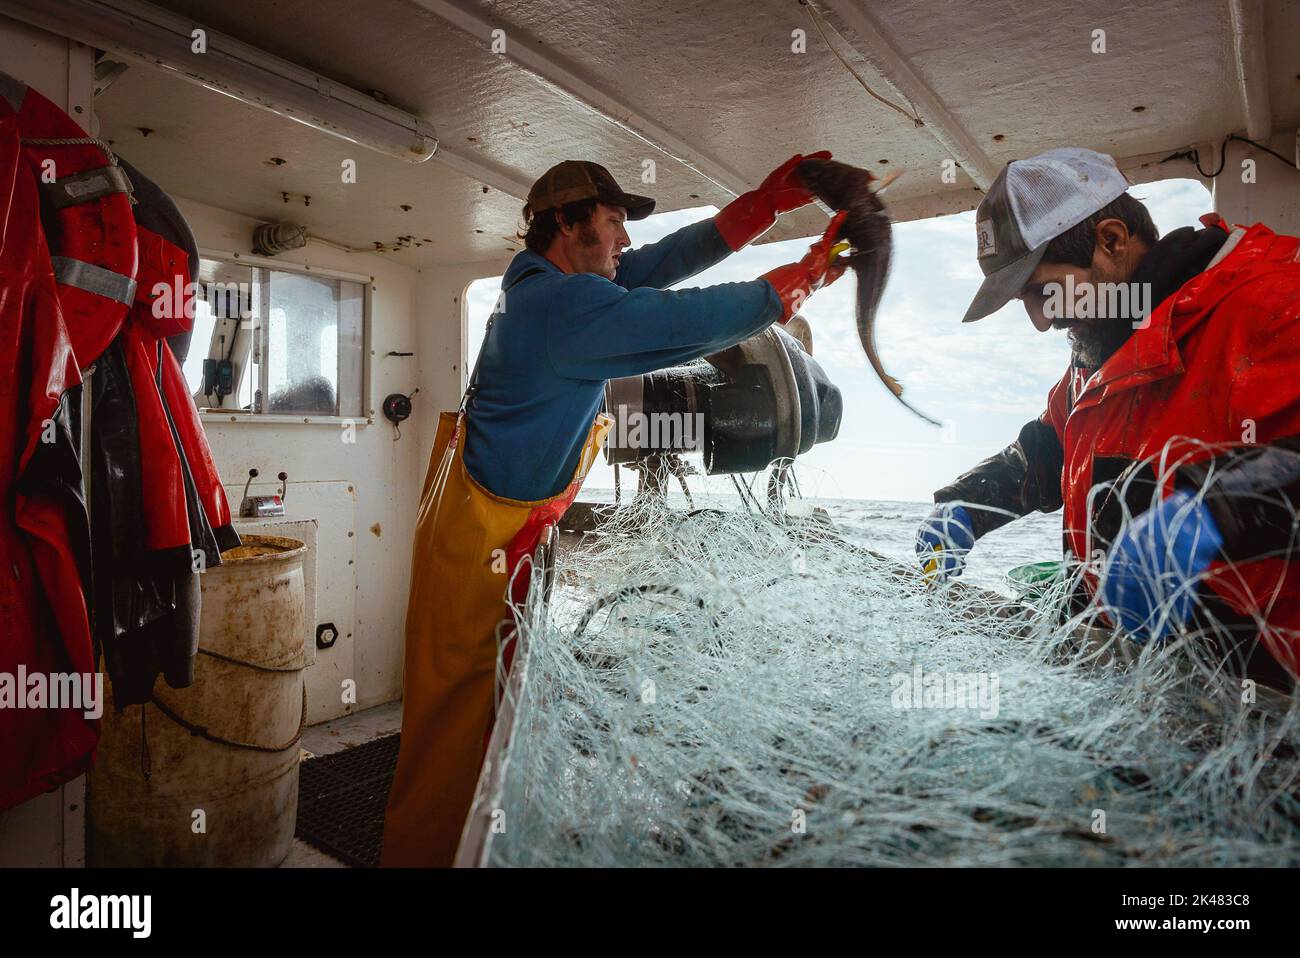 Portland, Maine, USA. 27th Sep, 2022. On board a commercial fishing boat, a crew member throws a pollock fish while another sorts through the nets off the coast of Maine. A board a gillnet fishing boat, crew haul their catch of monkfish, pollock, and cod from the early hours of the morning until late at night. The fishing industry in Maine has recently taken a blow with a new set of restrictions on fishing and the environmental organization Seafood Watch recommending for people to avoid eating American lobster. This listing and regulation pose fresh threats to fishers' livelihood Stock Photo